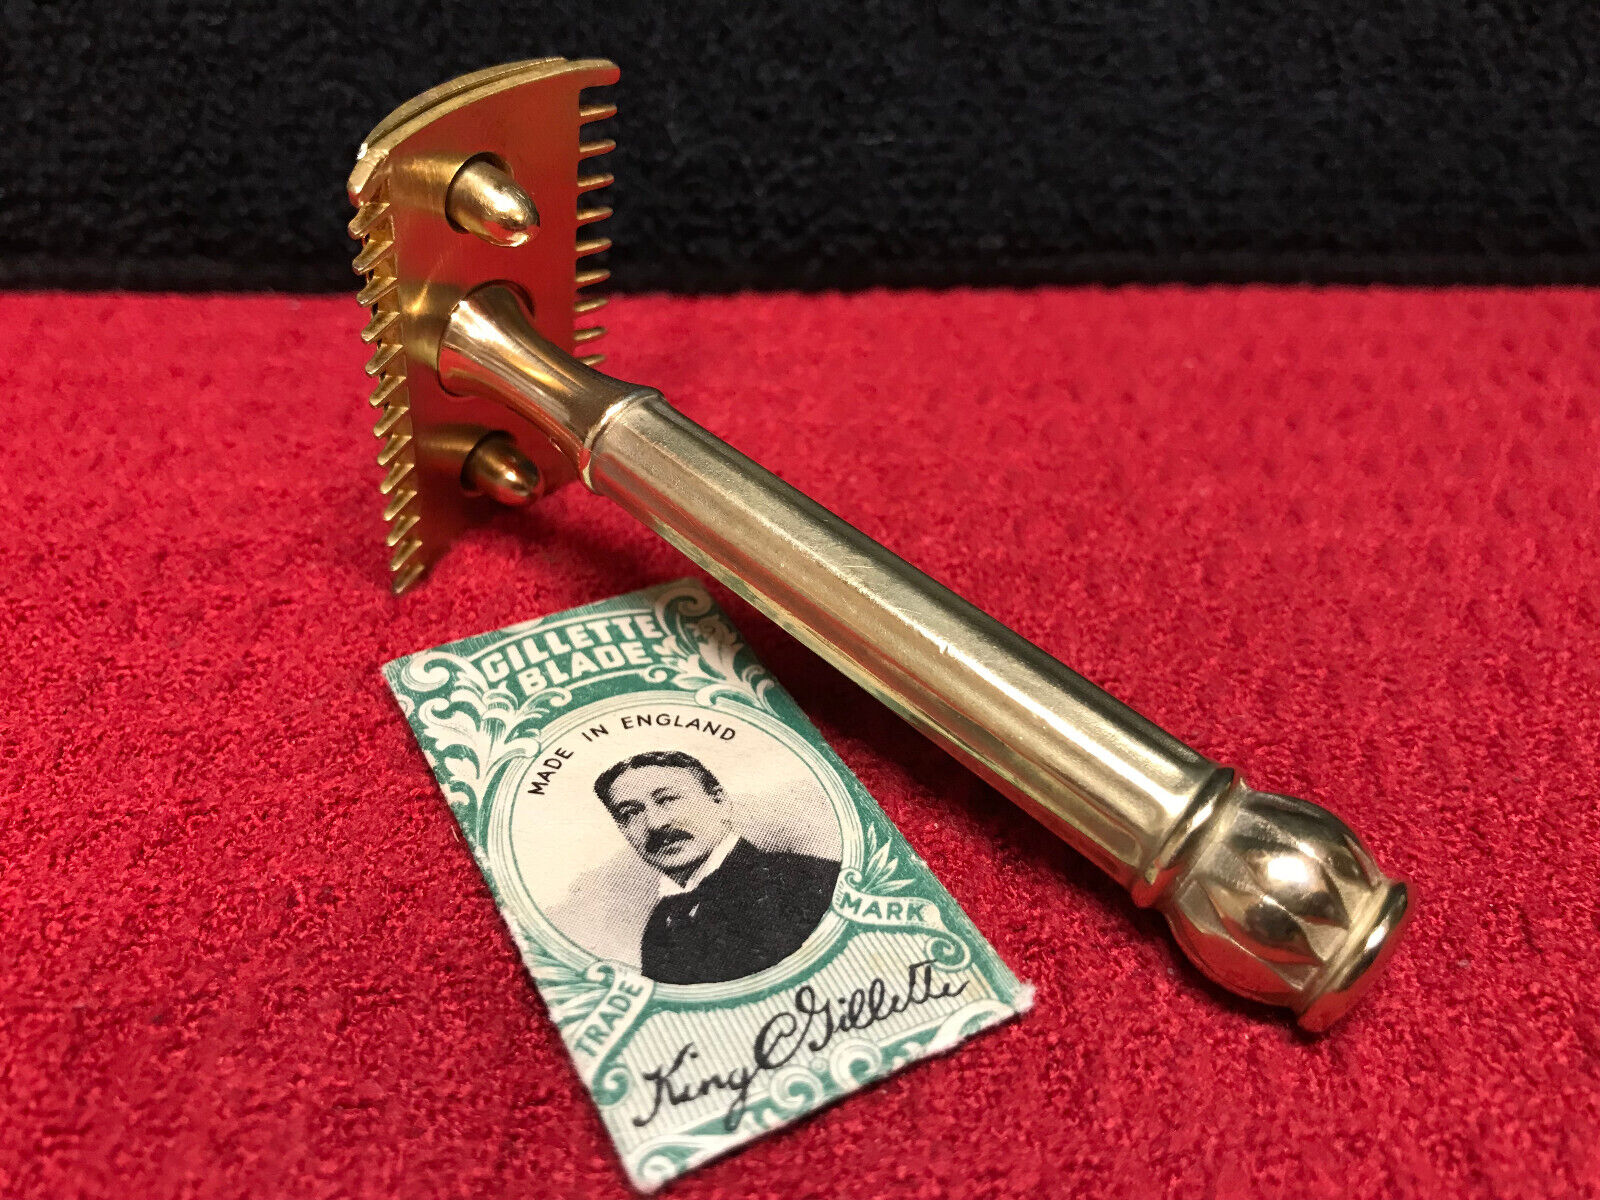 Stunning 1911 Gillette Gold ABC Safety Razor - Shell Design w/Larger Ball End